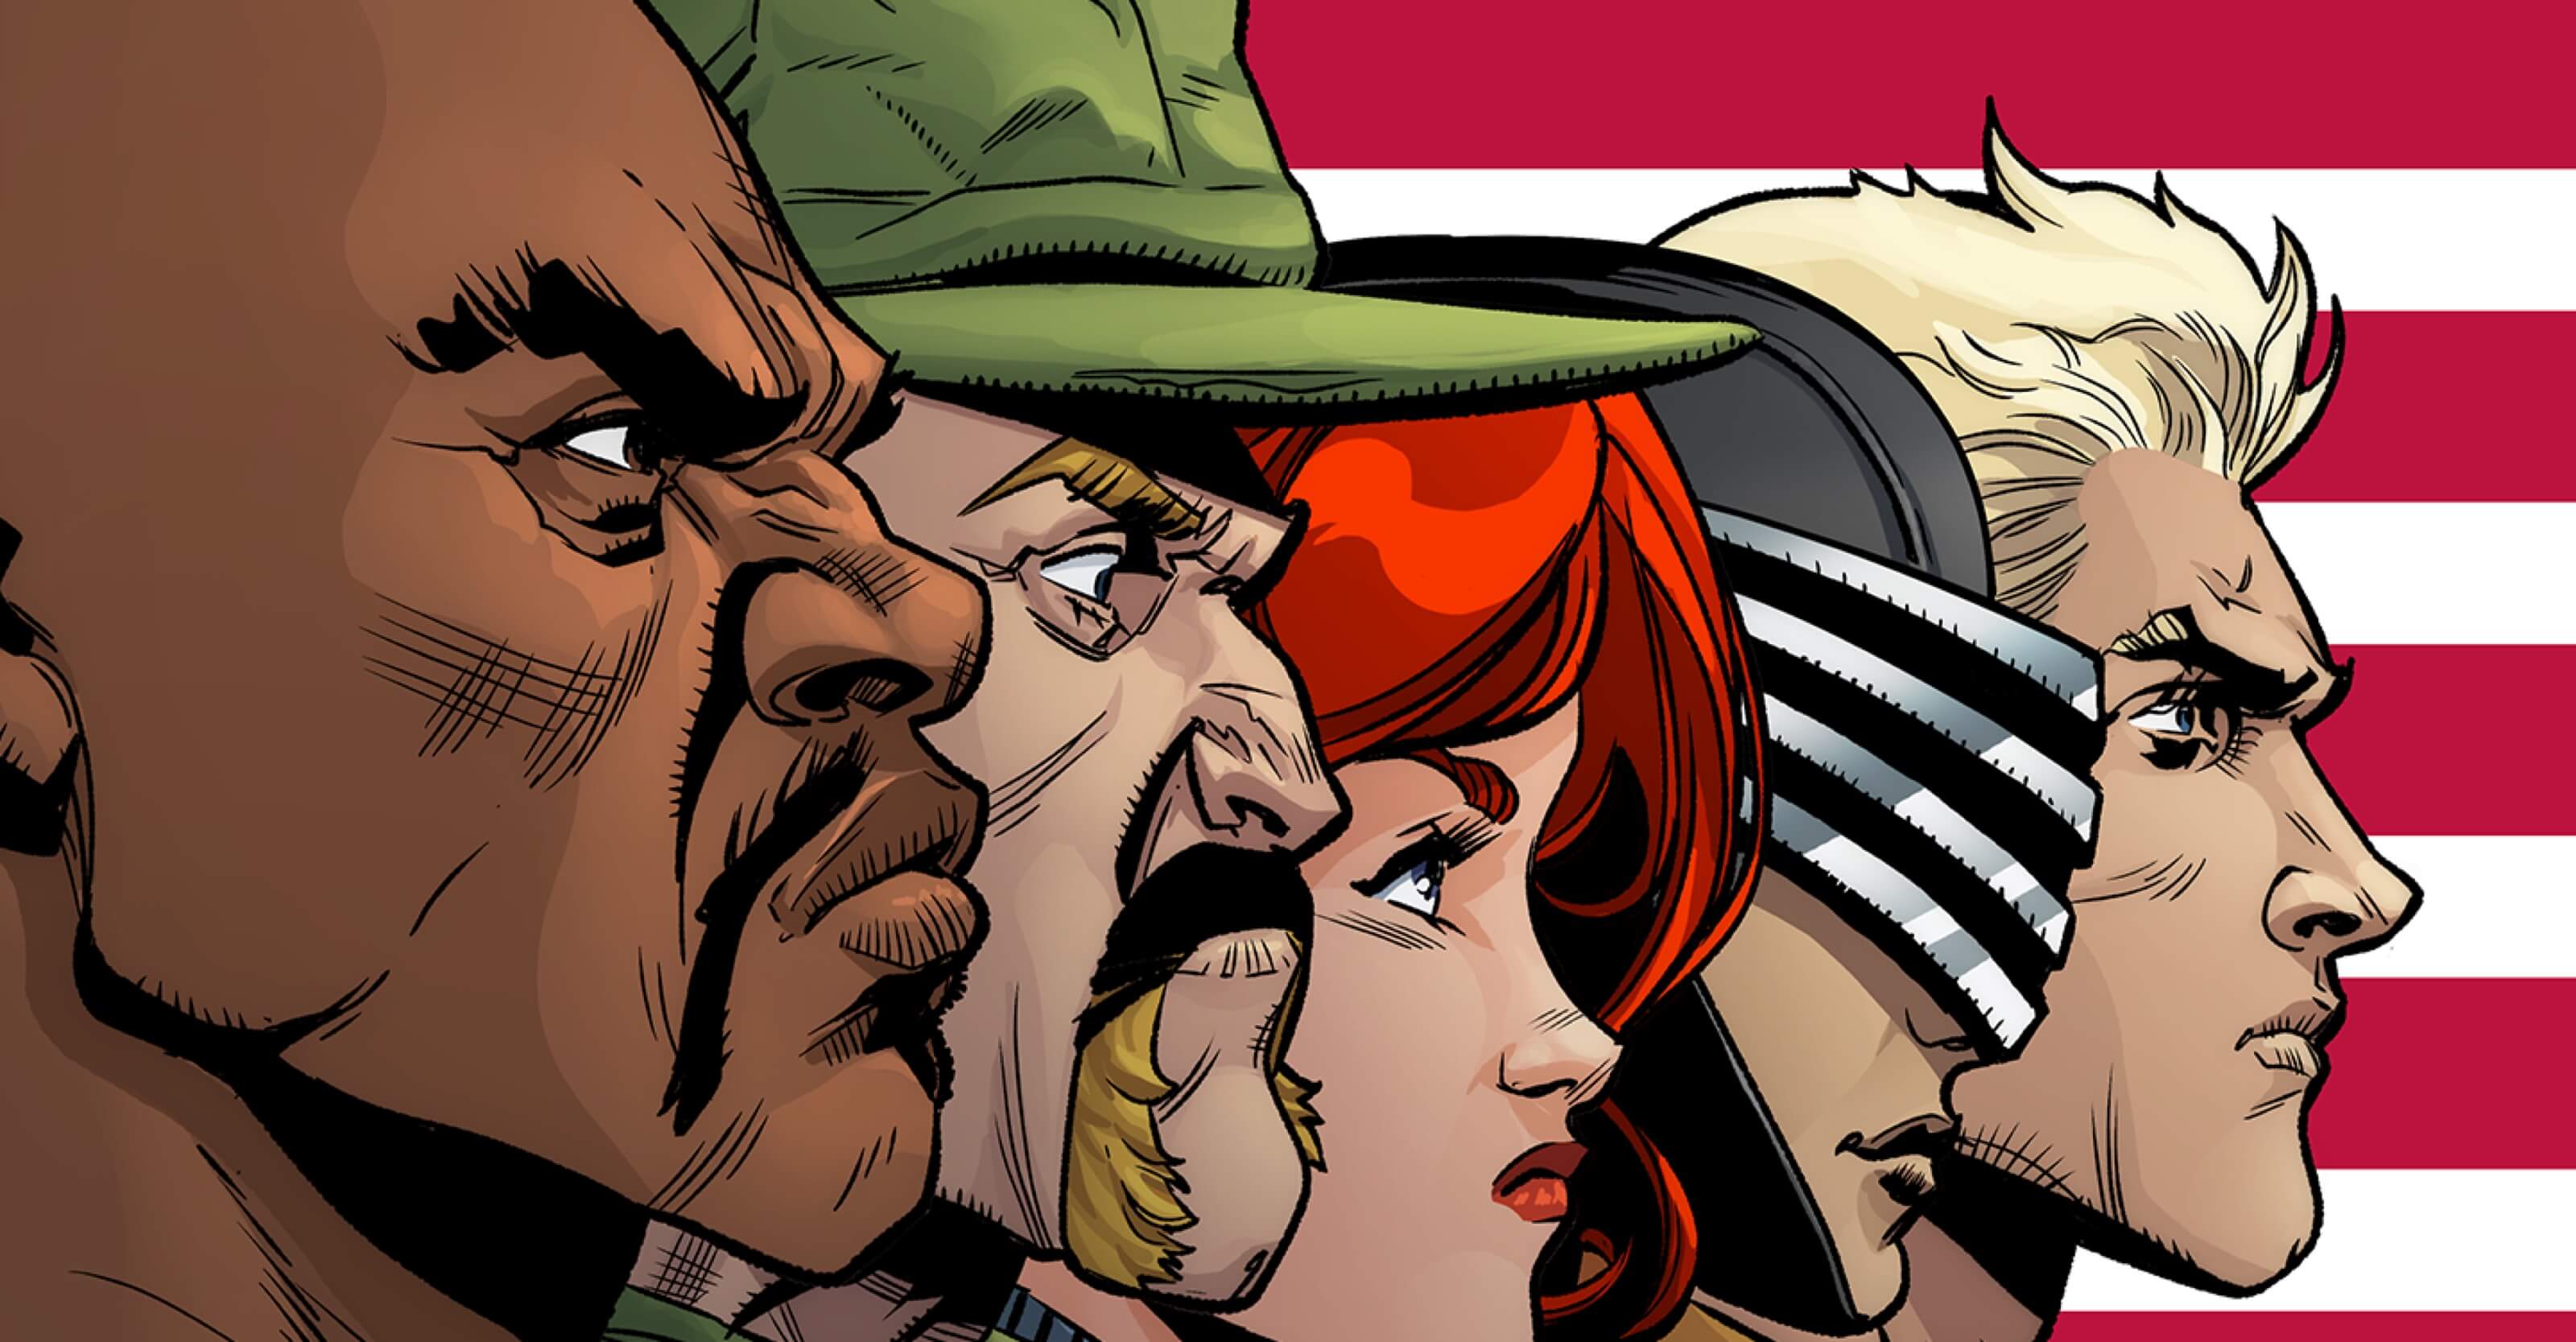 IDW Salutes Larry Hama and the End of a Comic Book Era with G.I. JOE: A Real American Hero #300